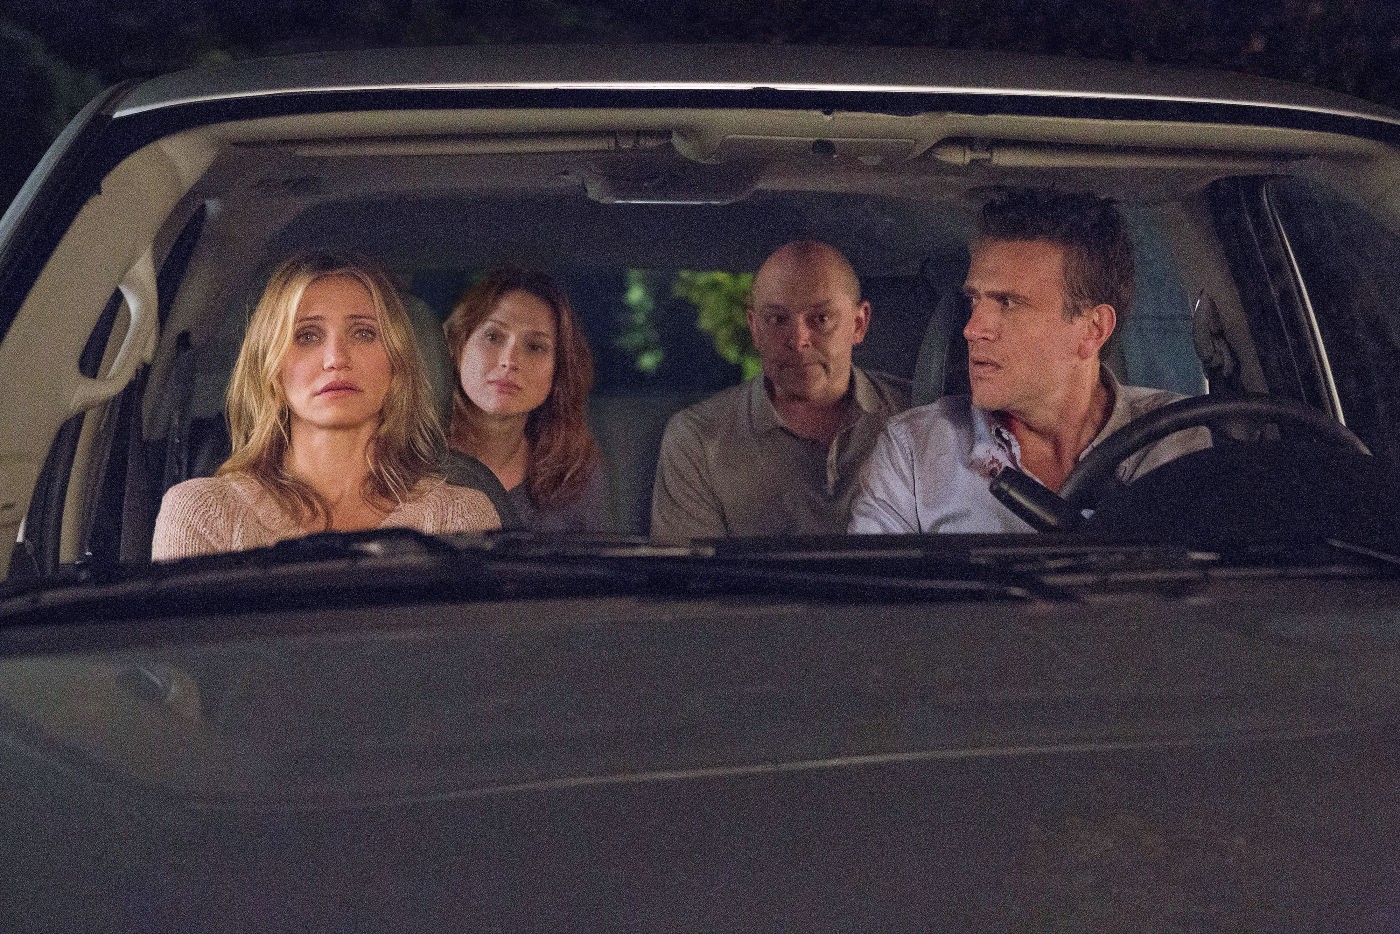 Cameron Diaz, Ellie Kemper, Rob Corddry and Jason Segel in Columbia Pictures' Sex Tape (2014)